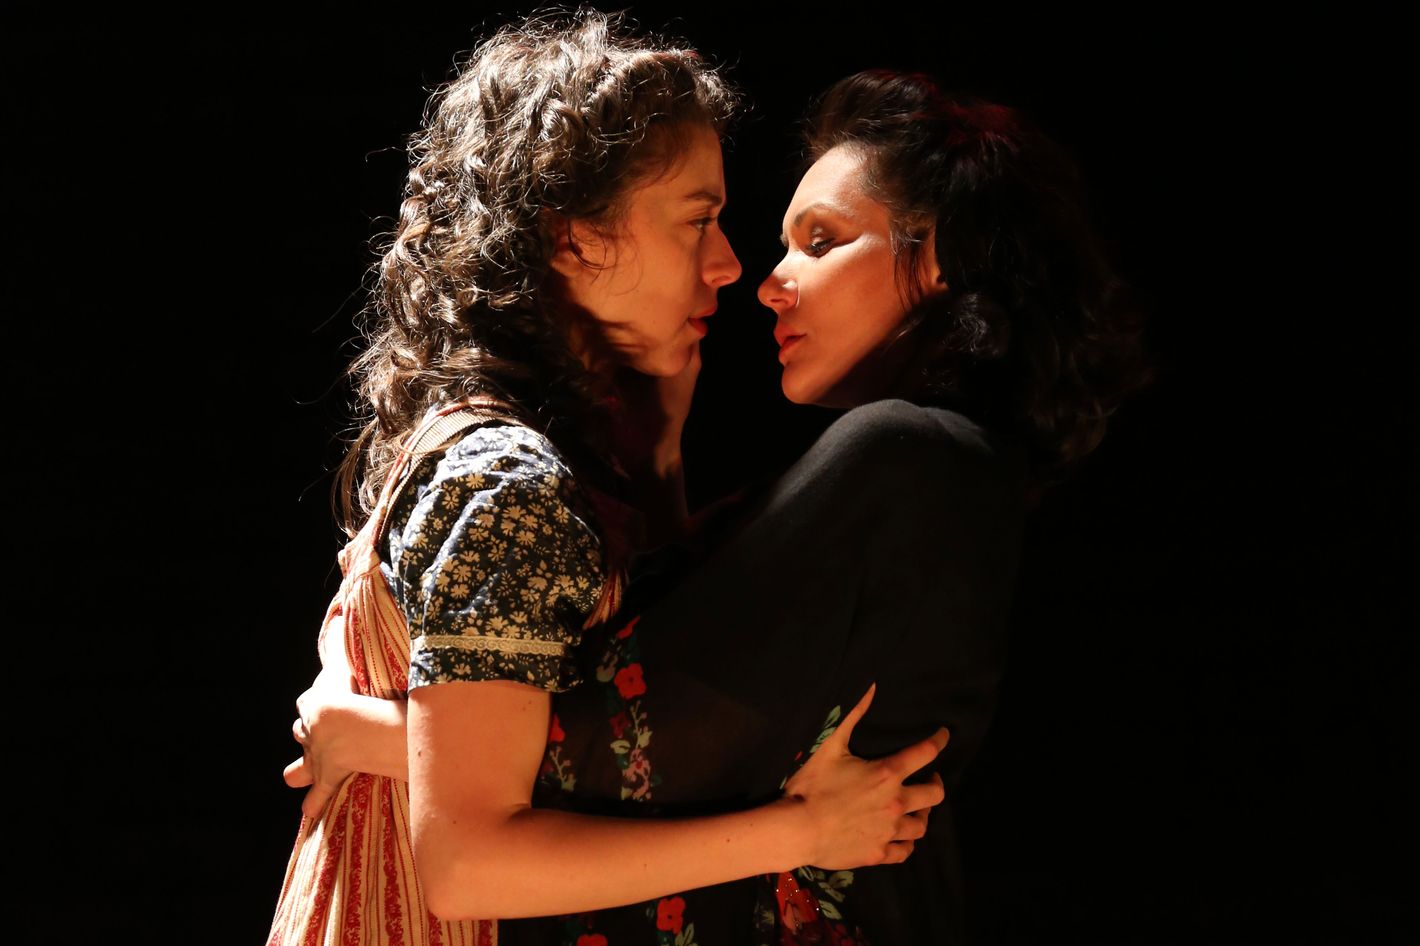 The Lesbian Kiss in Indecent Broadway Play by Paula Vogel